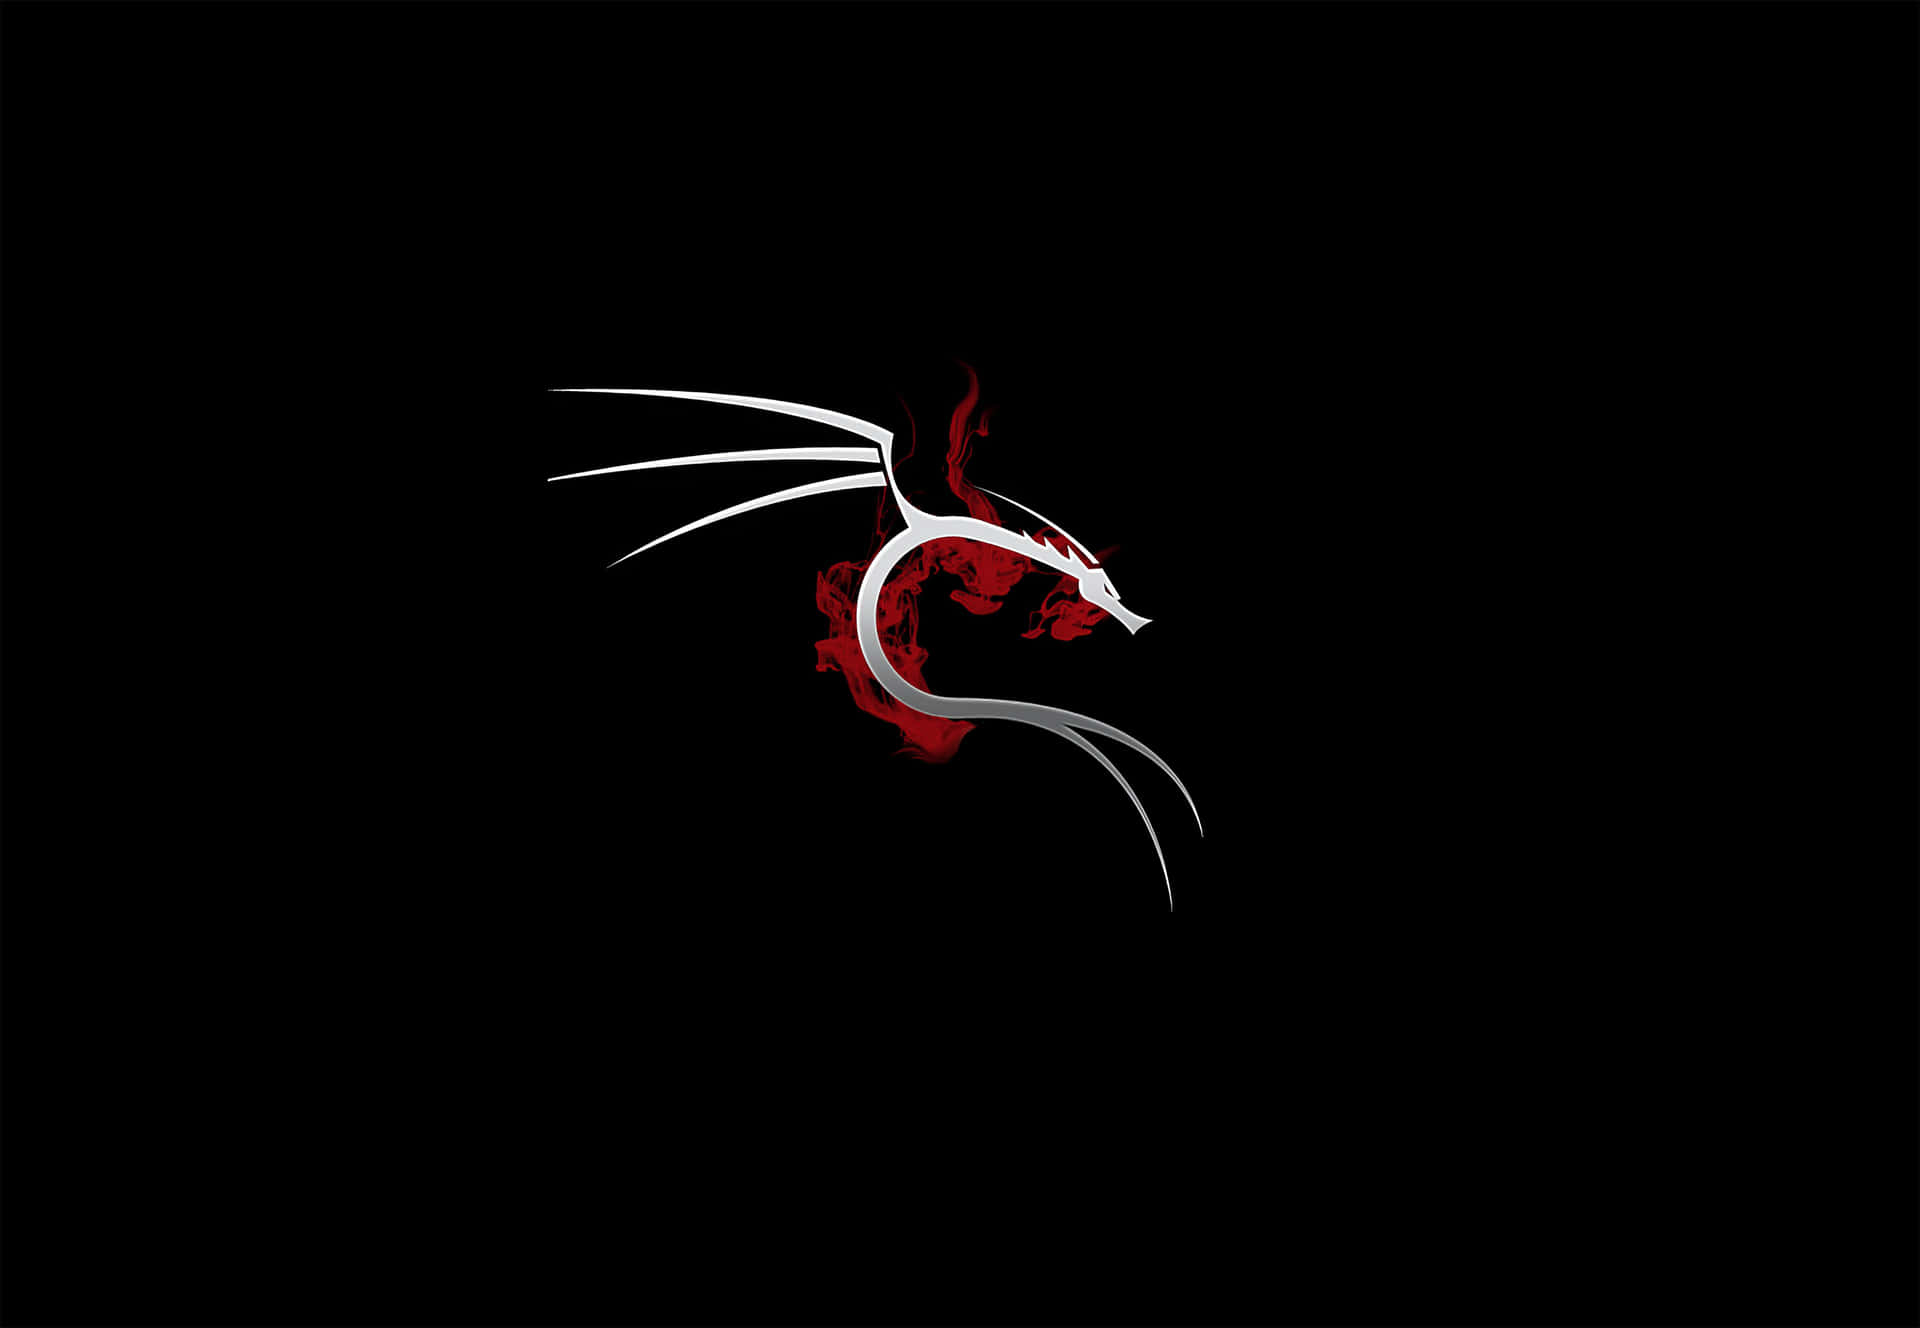 Discover the power of ethical hacking with Kali Linux.